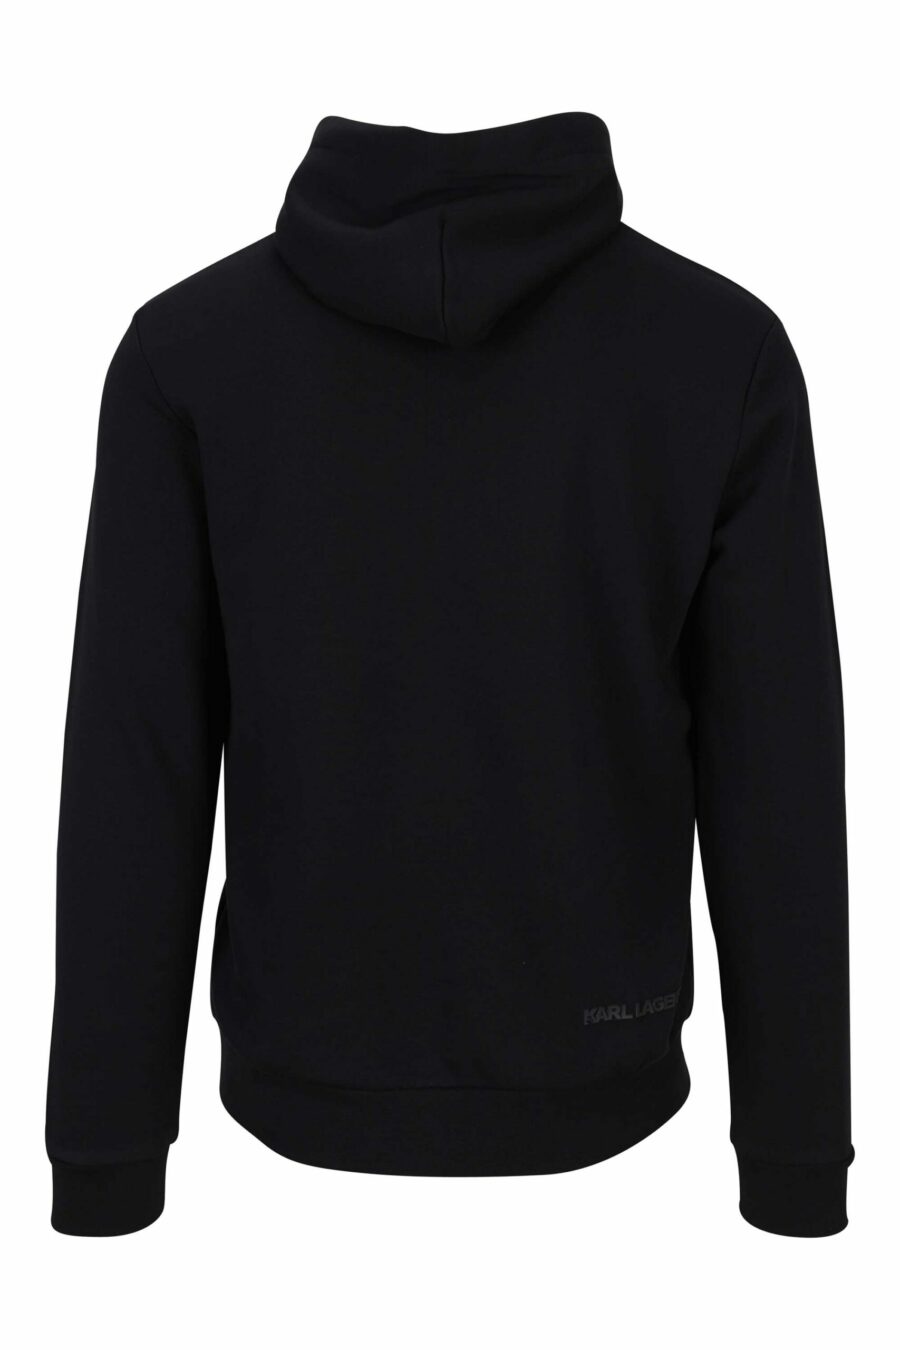 Black hooded sweatshirt with "rue st guillaume" logo in gold lettering - 4062226648967 1 1 scaled